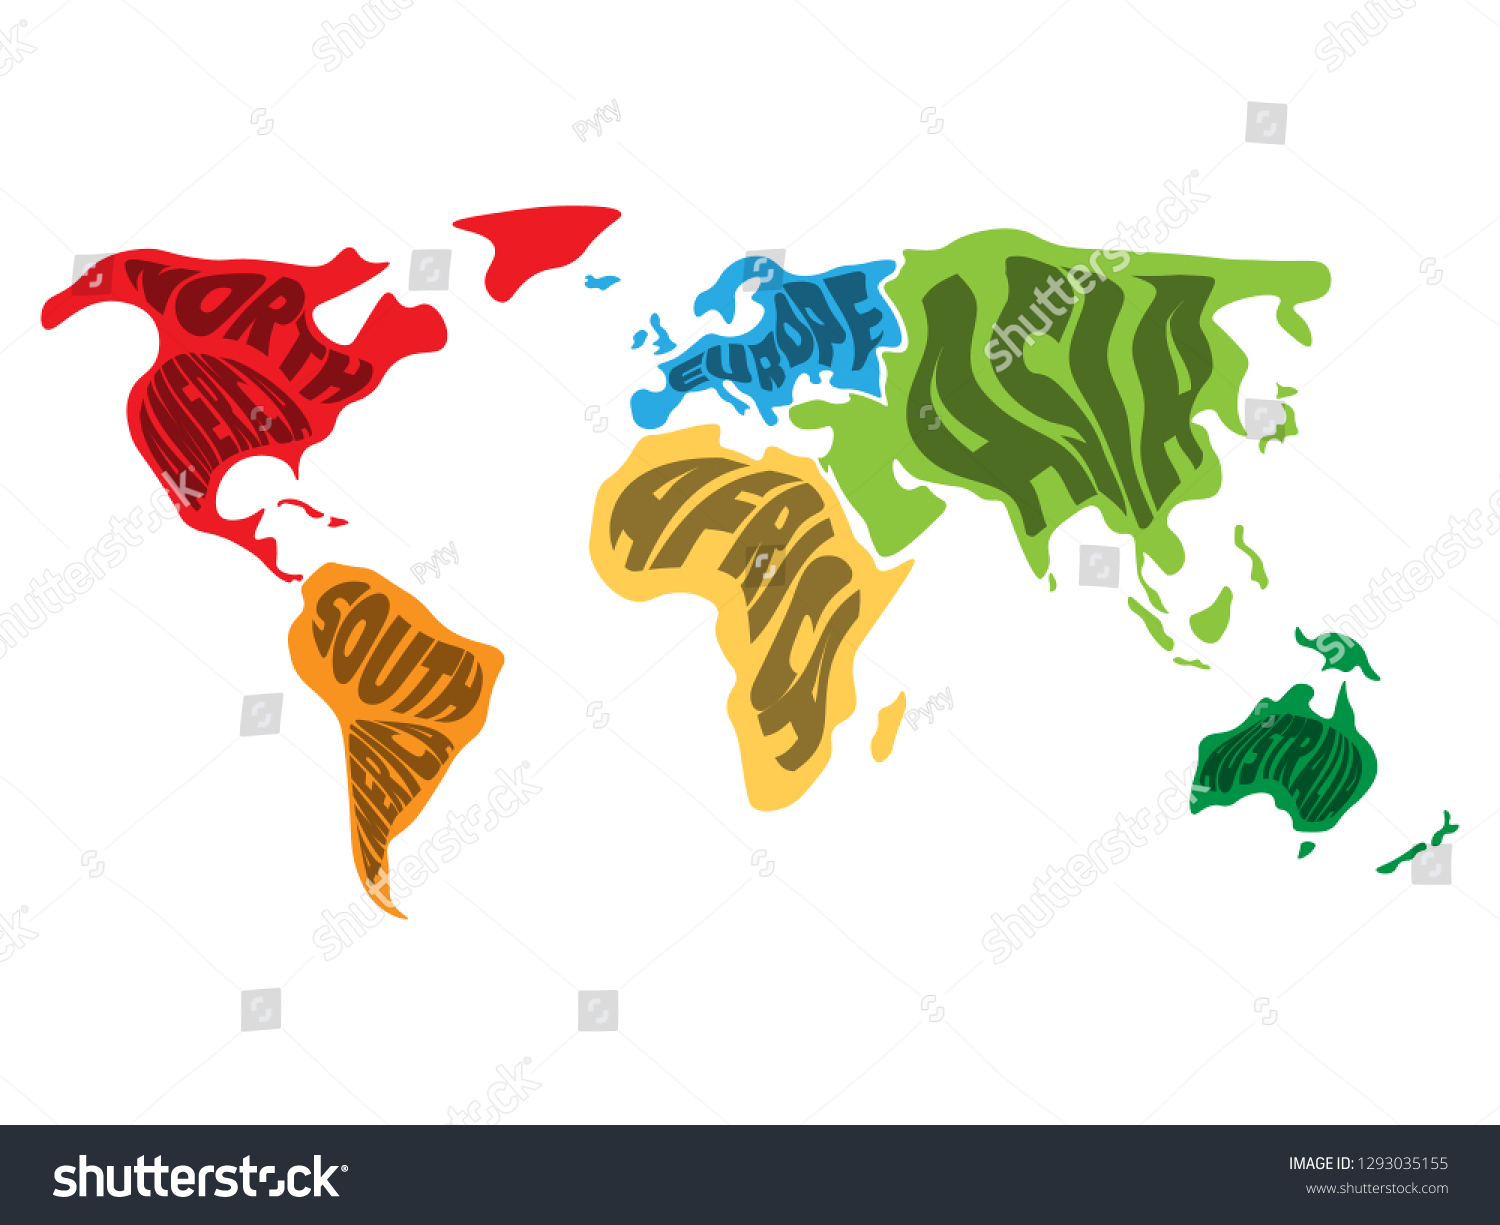 World Map Divided Into Six Continents Stock Vector Royalty Free 1293035155 Shutterstock 3622